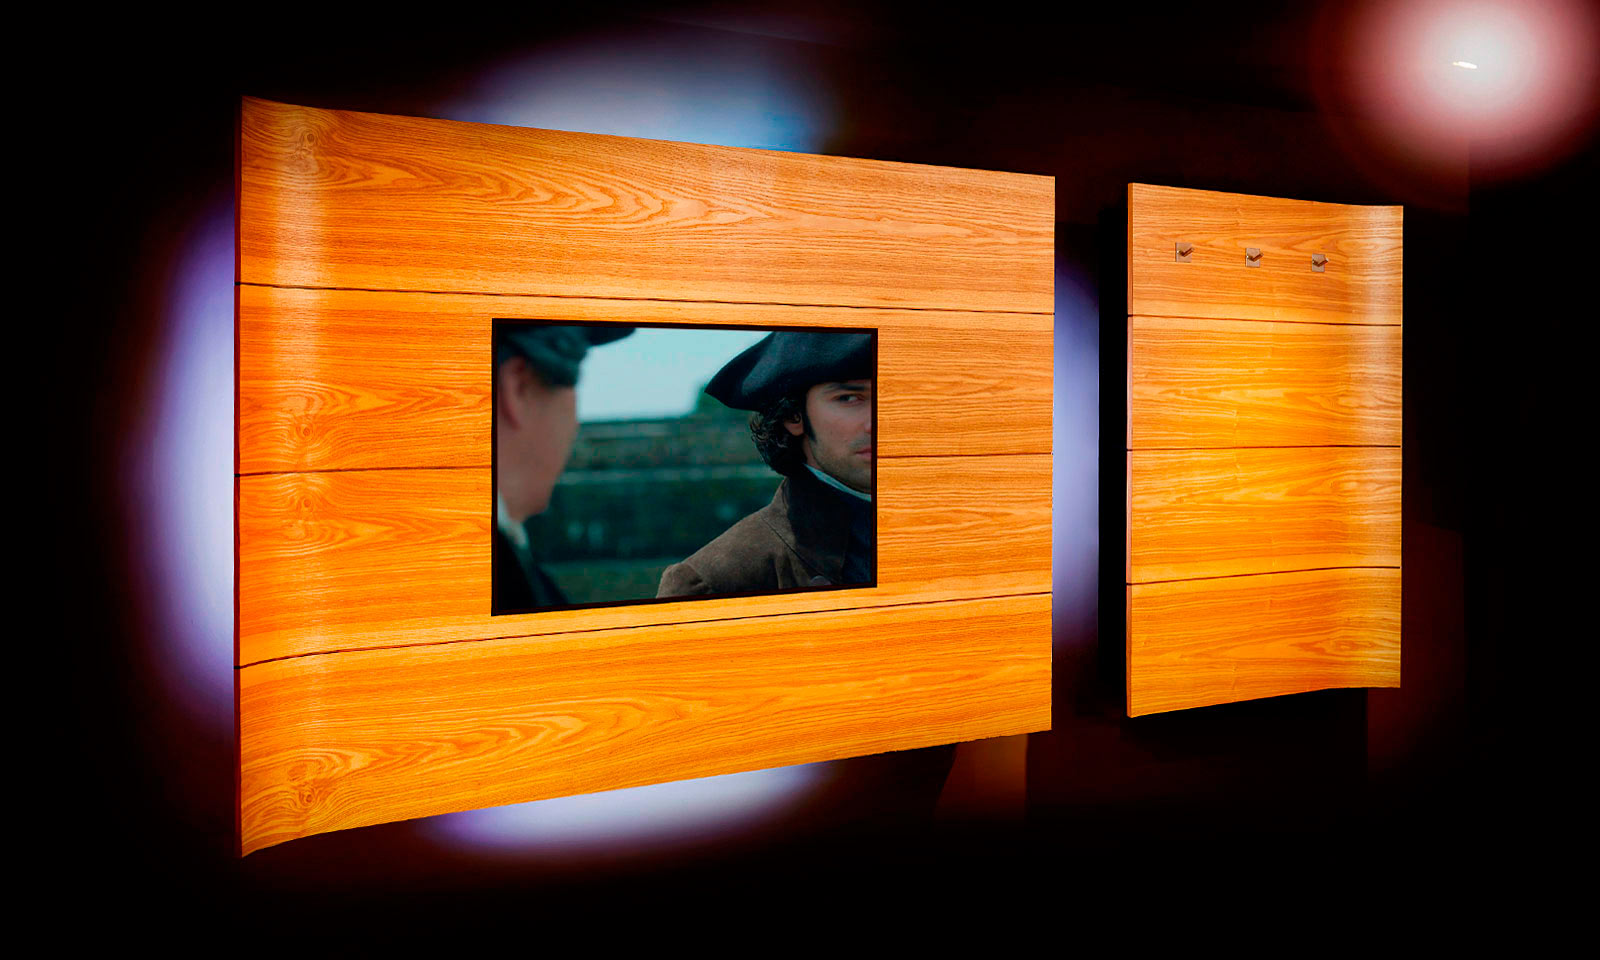 A bespoke, handmade, wall mounted home media centre, complete with hidden black shelving and LED lighting. Manufactured from curved Ash veneer, designed and installed by Mounts Hill Woodcraft.